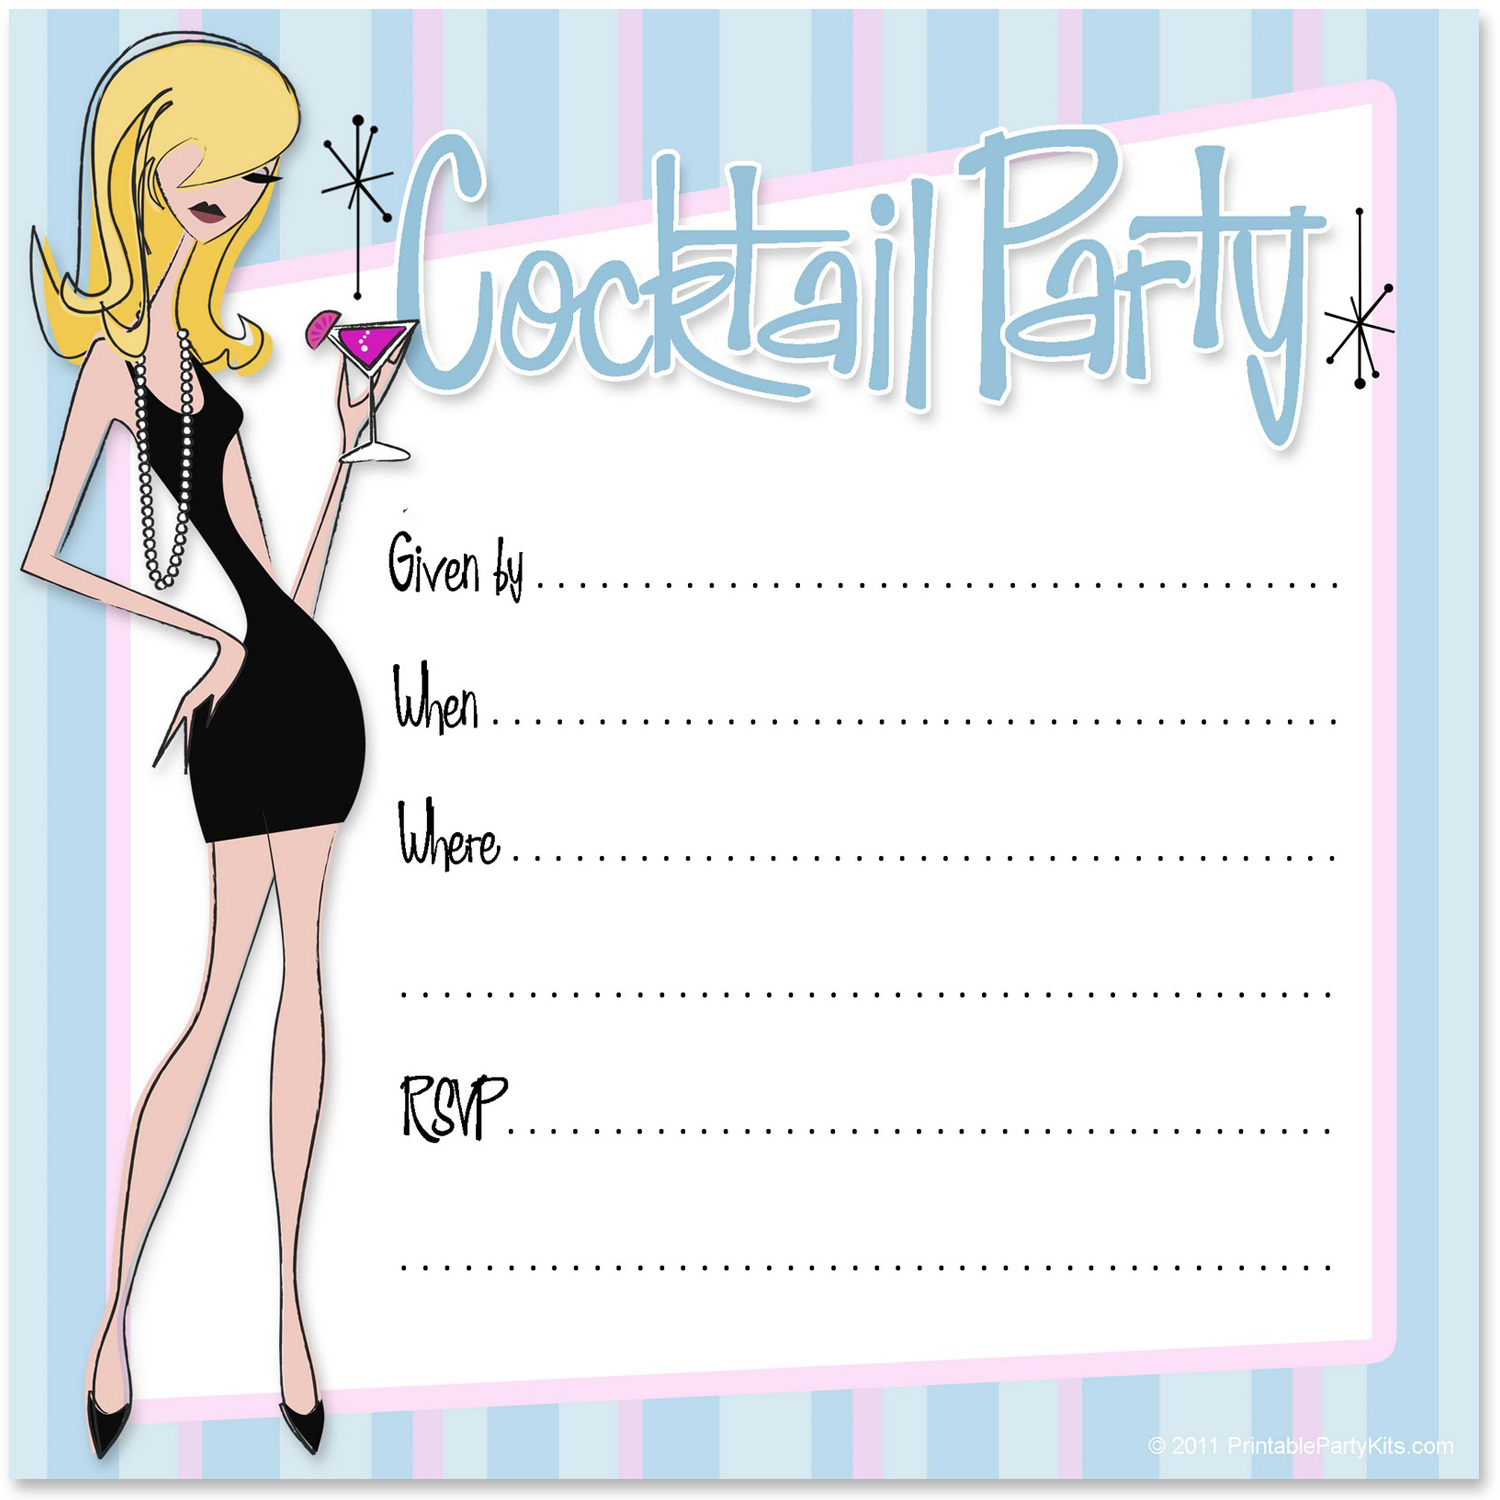 Printable Invite for Cocktail Receptions and Parties | Free Printable ...